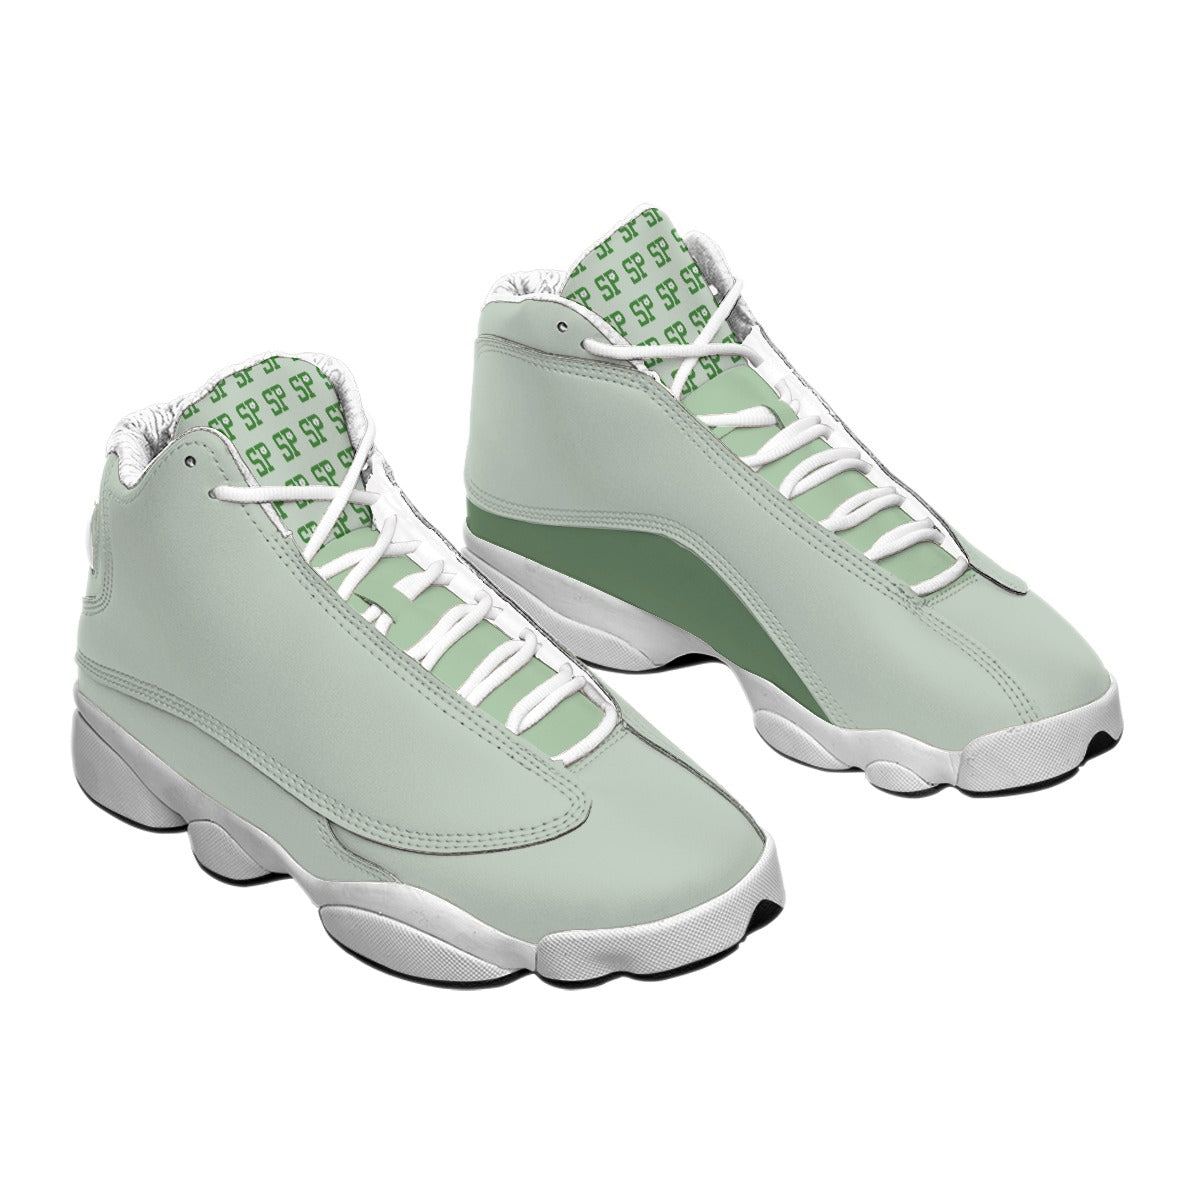 Men's Passion Basketball Shoes